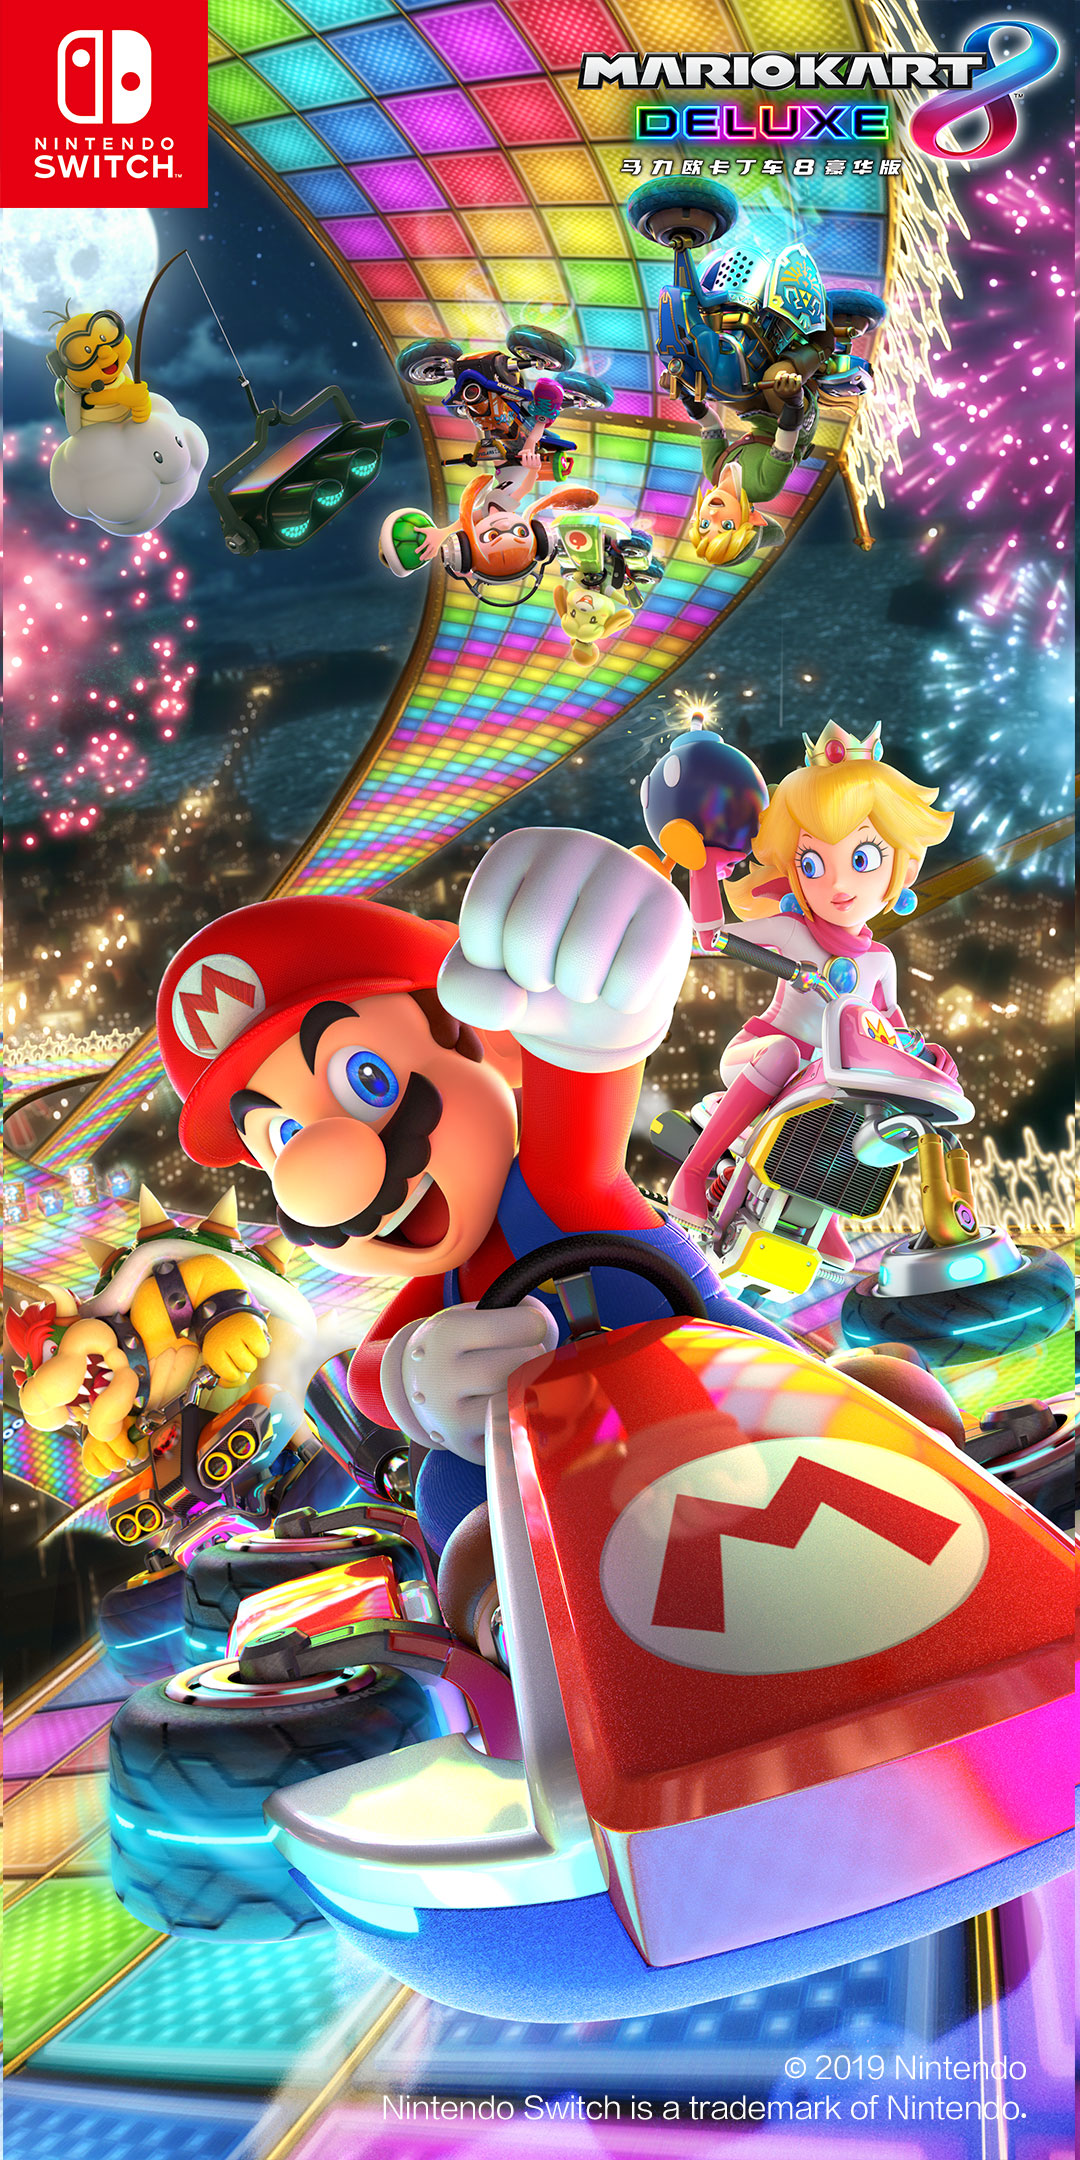 Nintendo wallpapers for iPhone